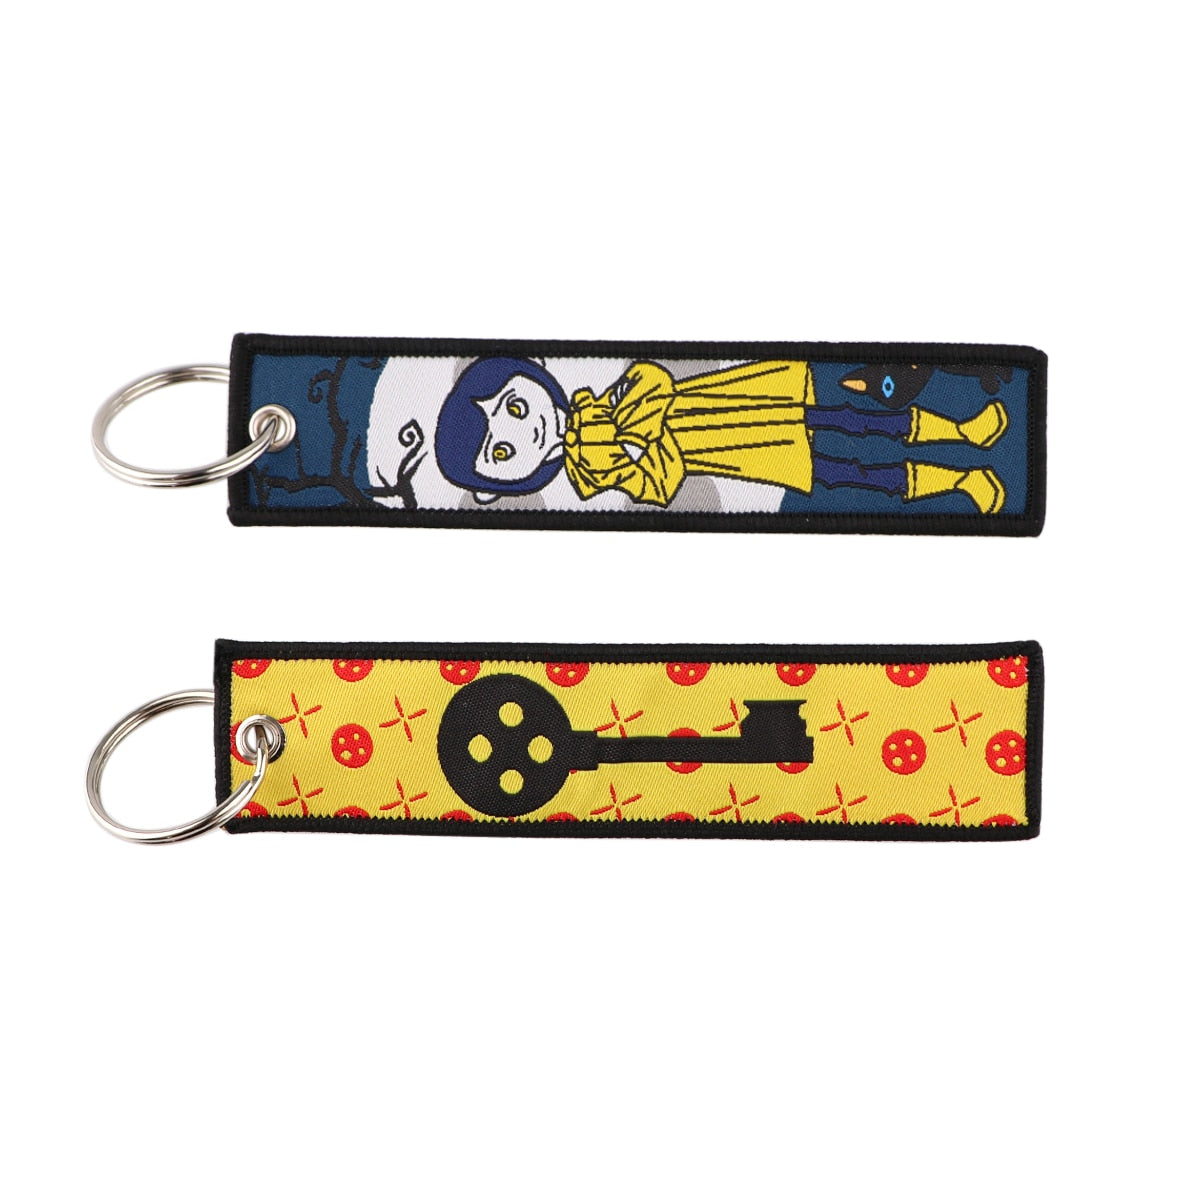 Anime Embroidery Keychain Key Ring 85